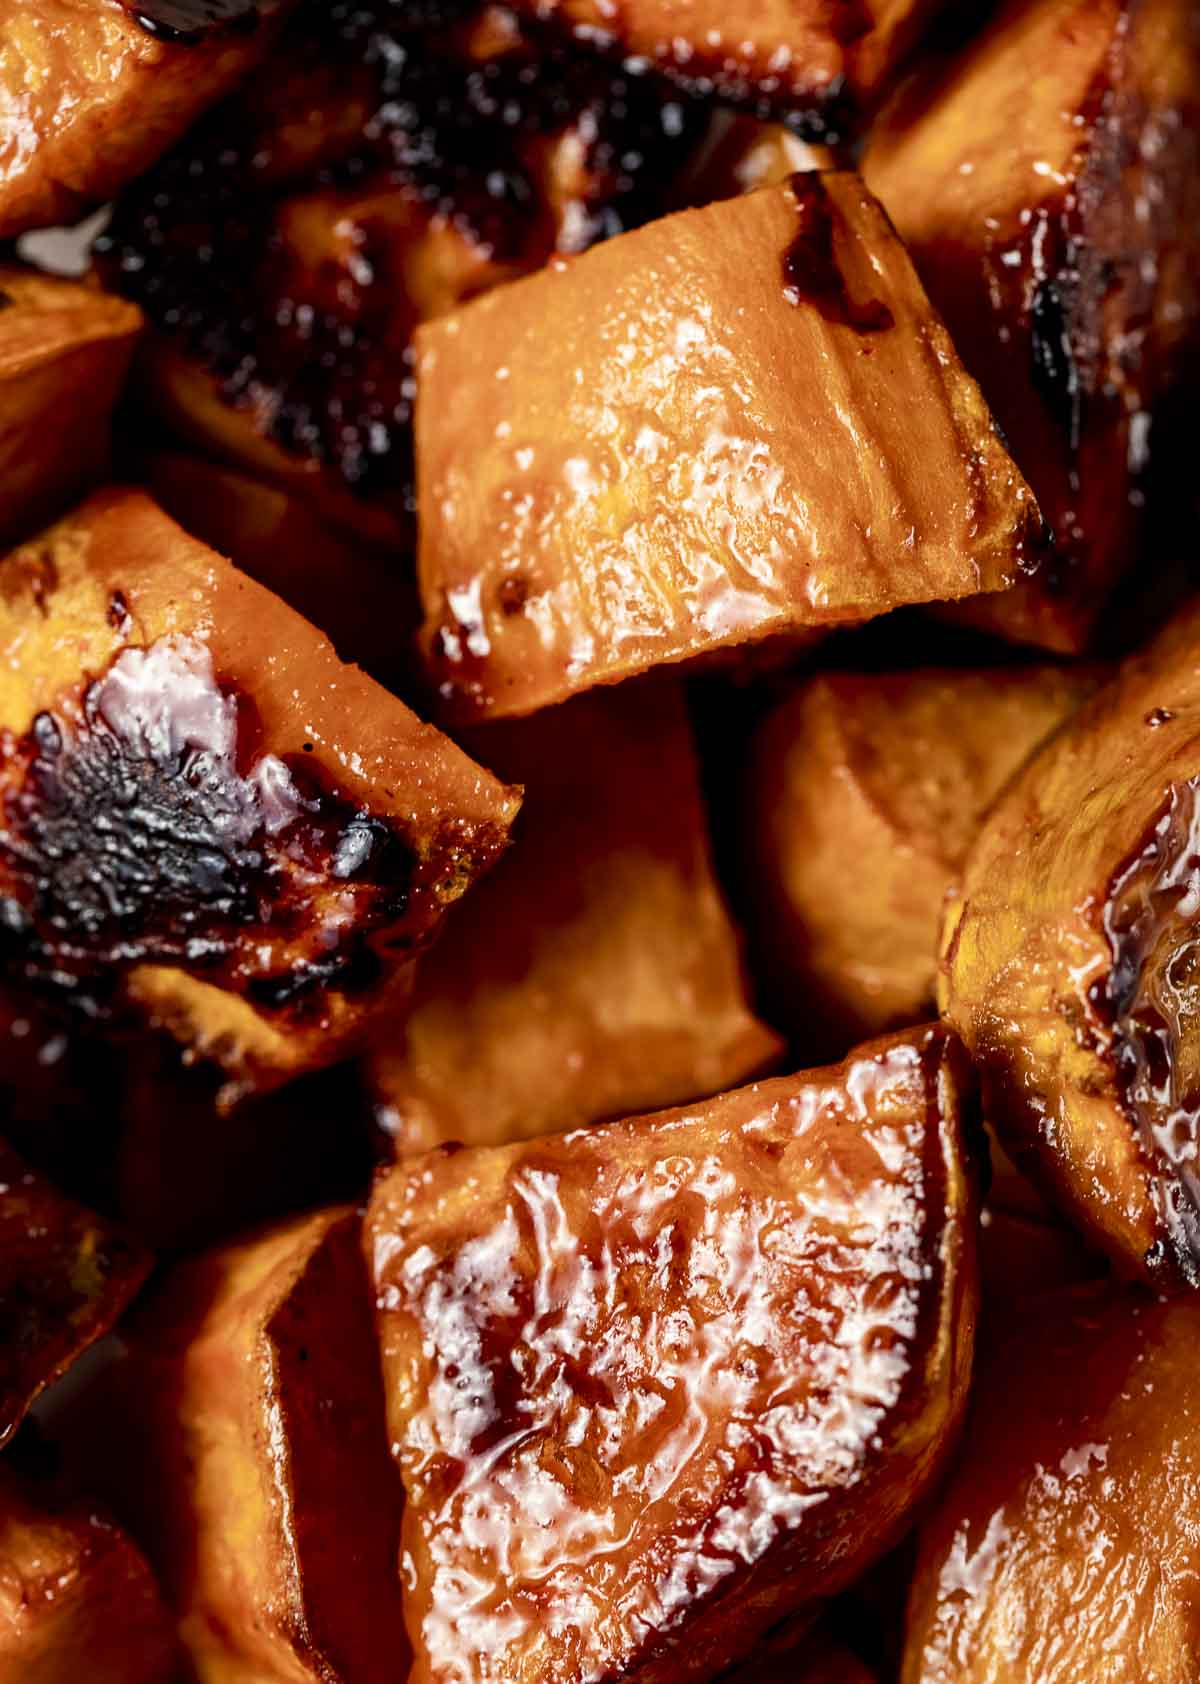 cubes of sweet potatoes in a brown colored glaze